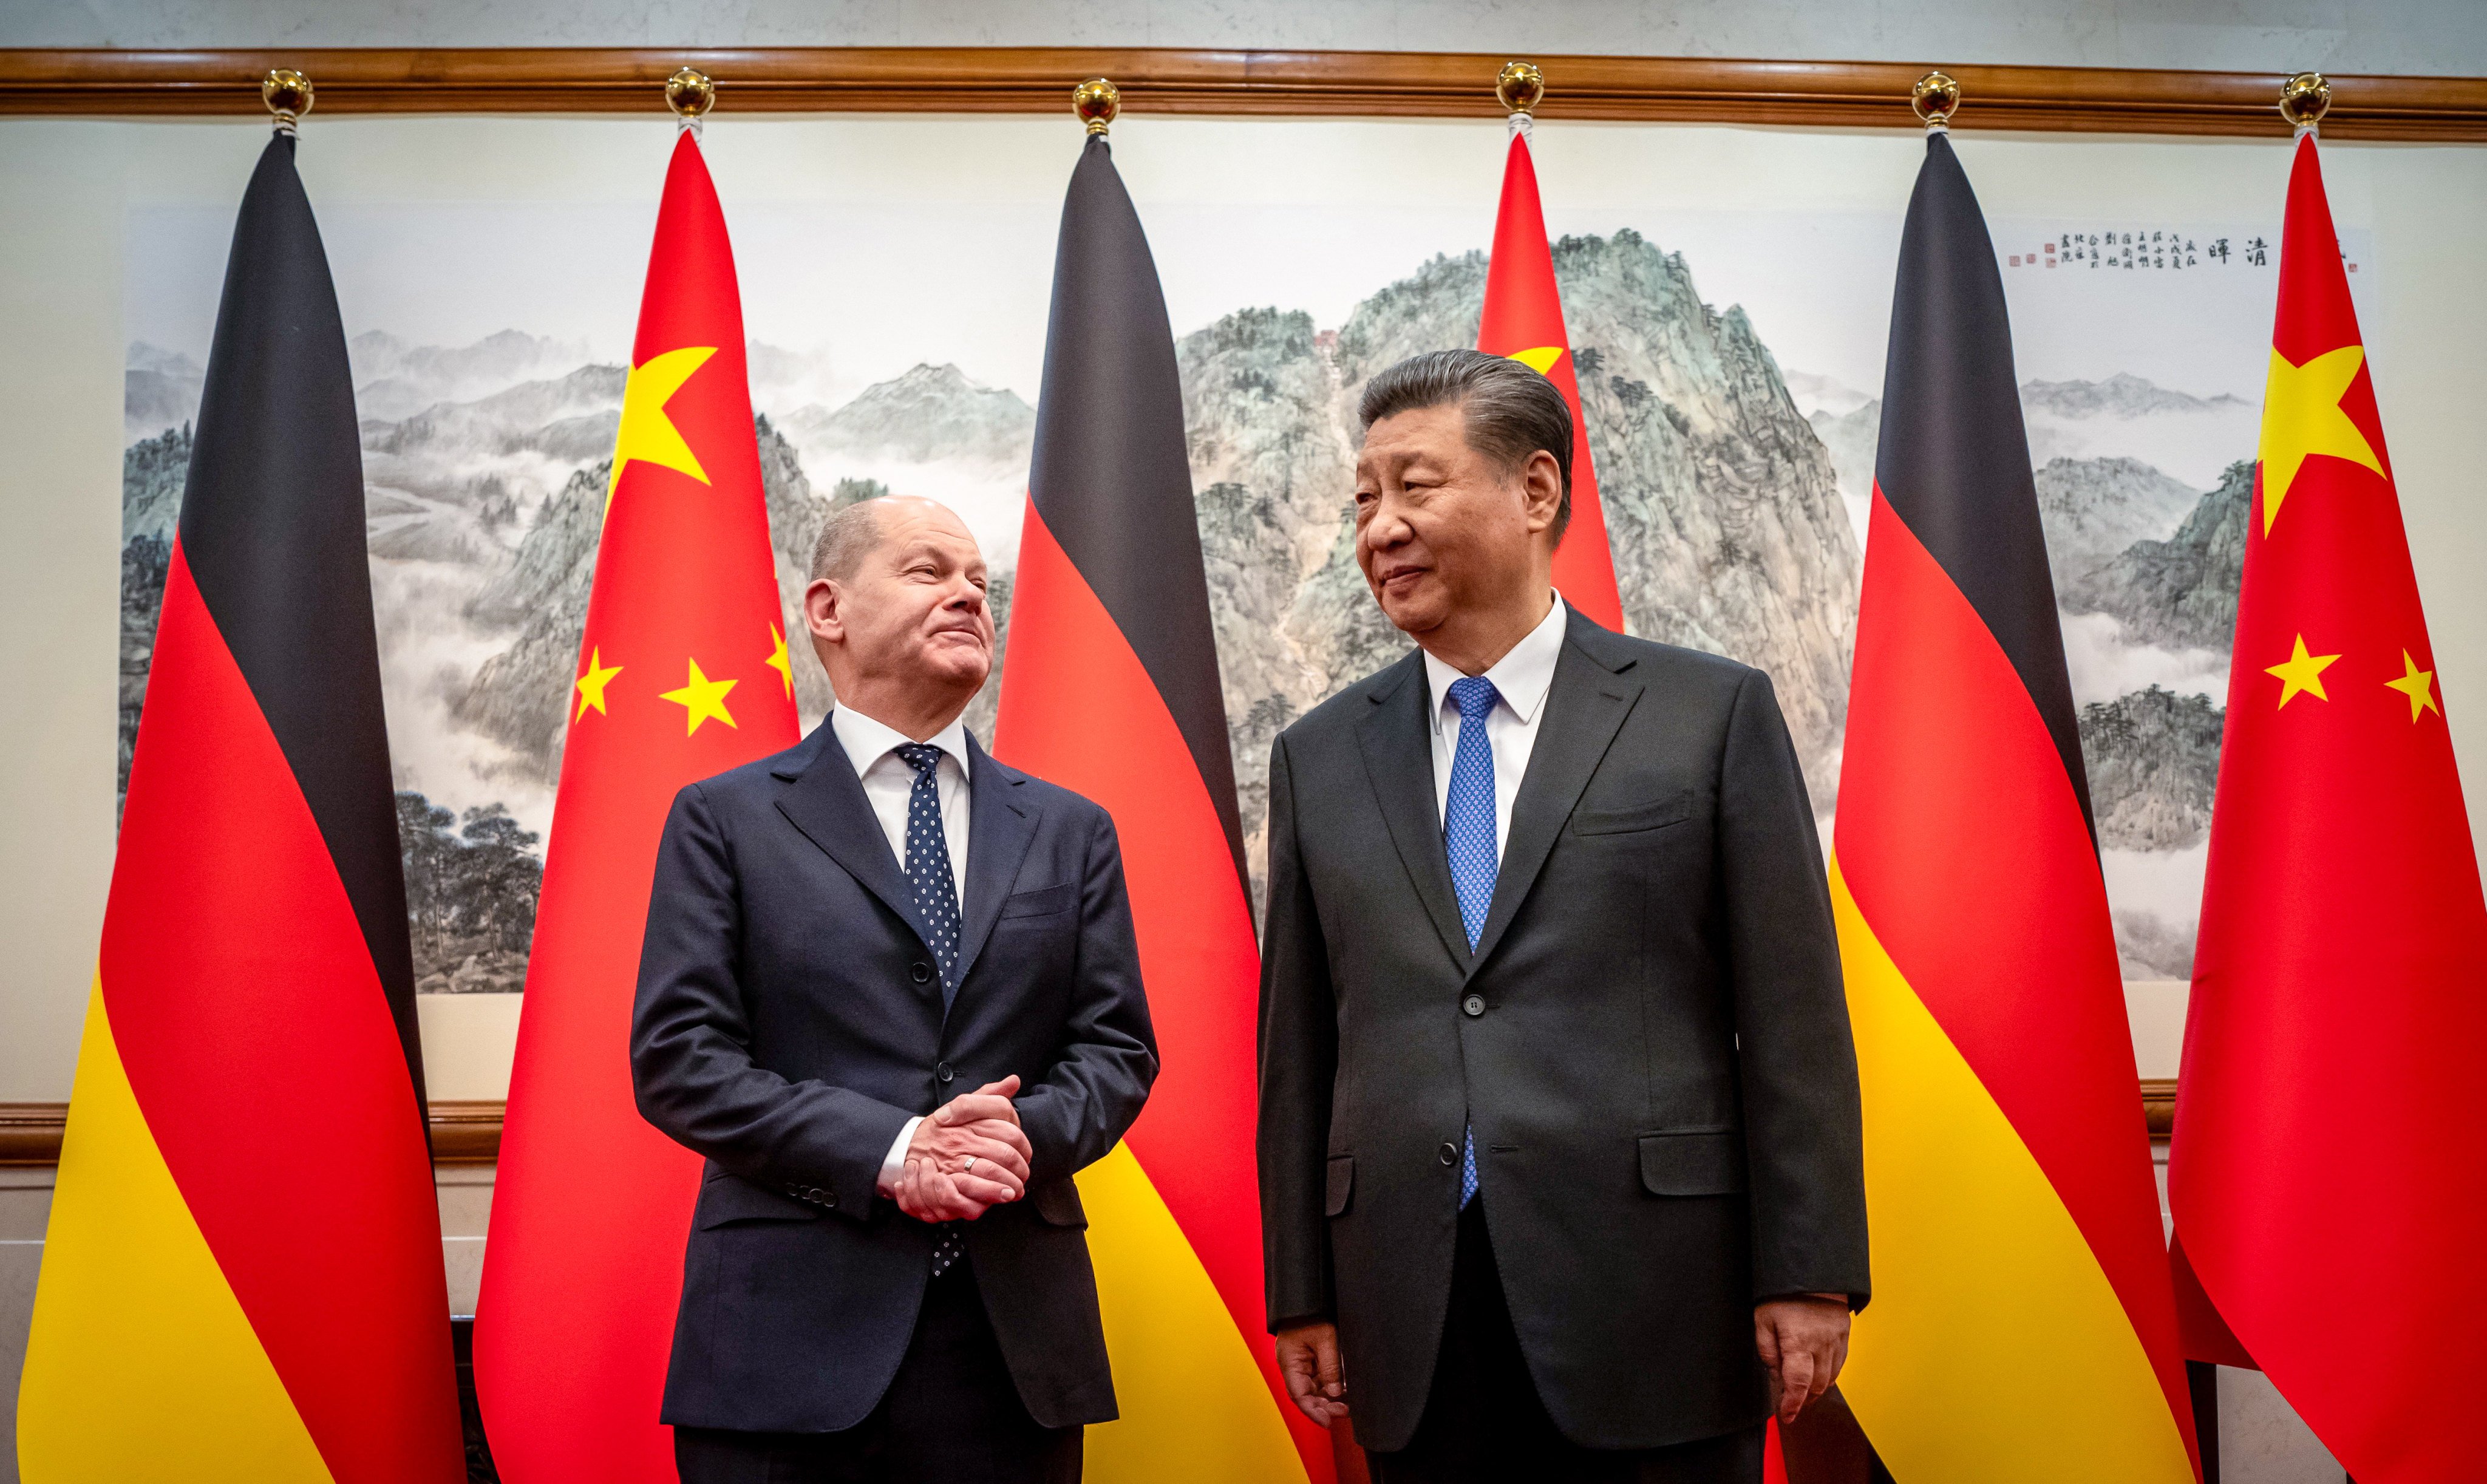 Chinese President Xi Jinping welcomes German Chancellor Olaf Scholz to the State Guest House. Photo: dpa